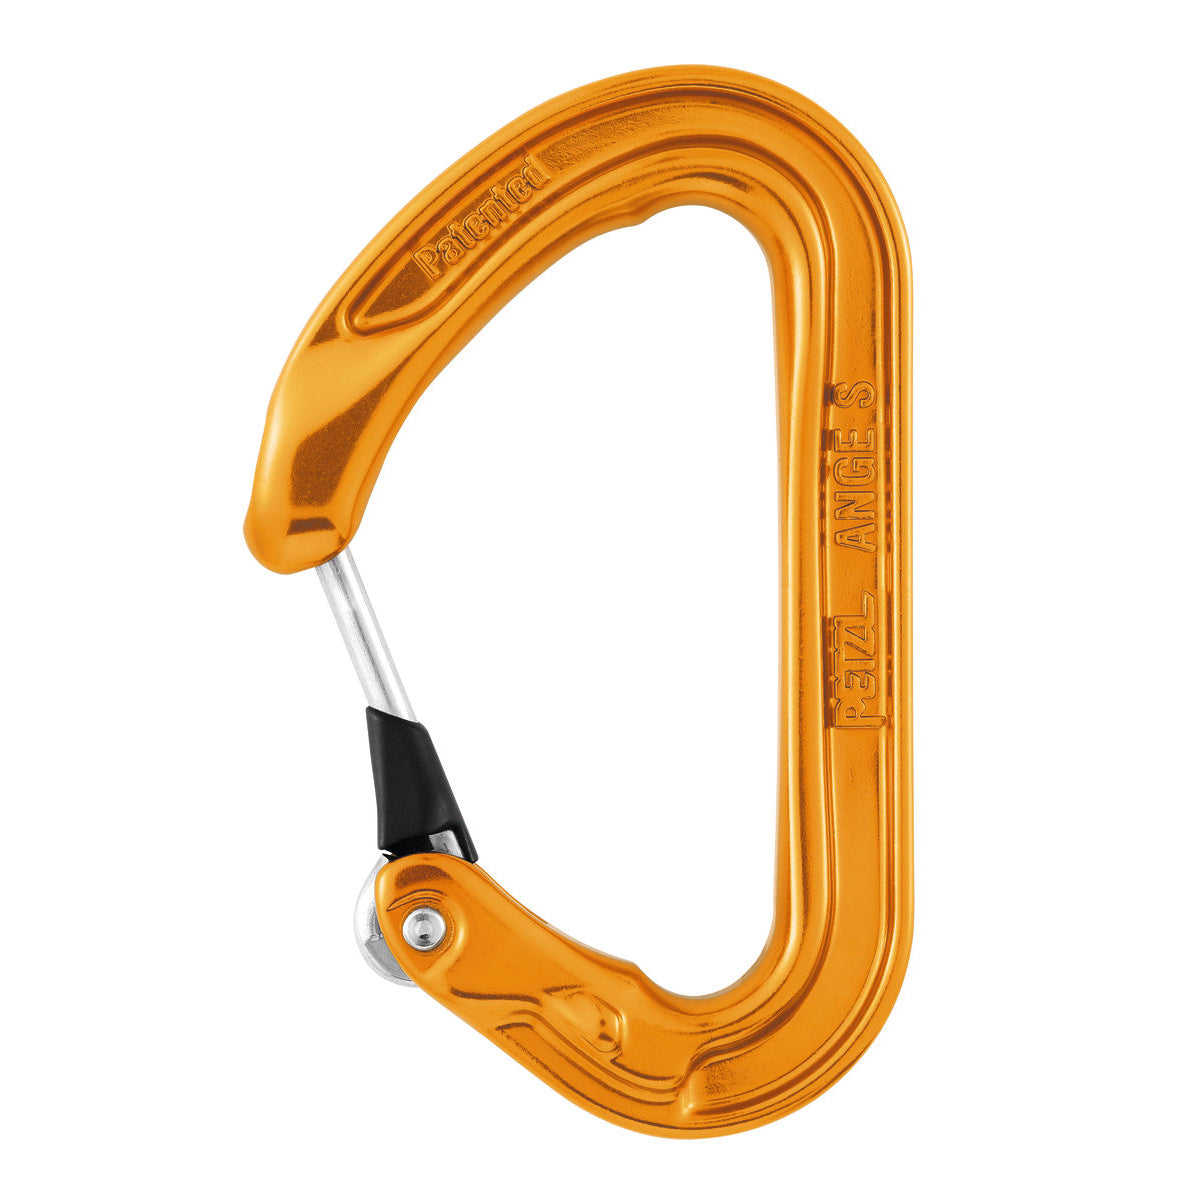 Petzl ANGE S climbing carabiner in orange colour, with silver gate closed